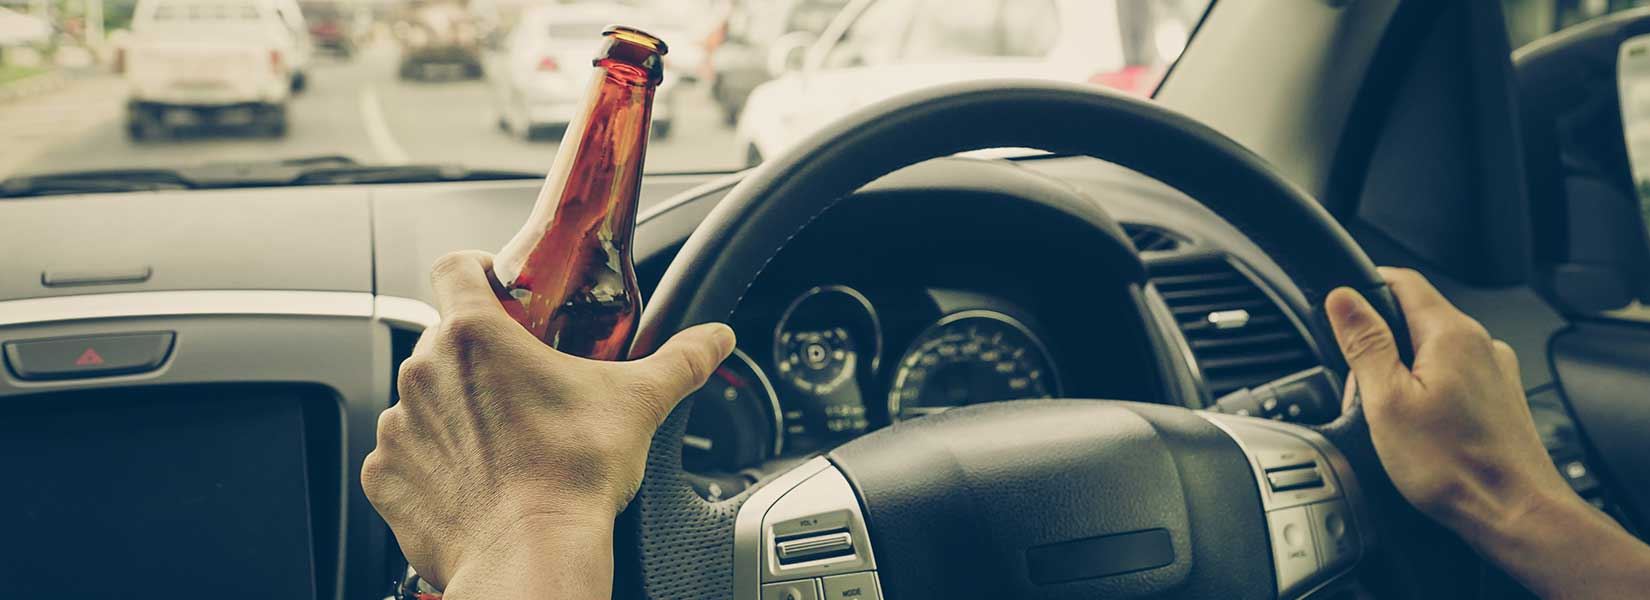 A person driving a car with a beer in their hand